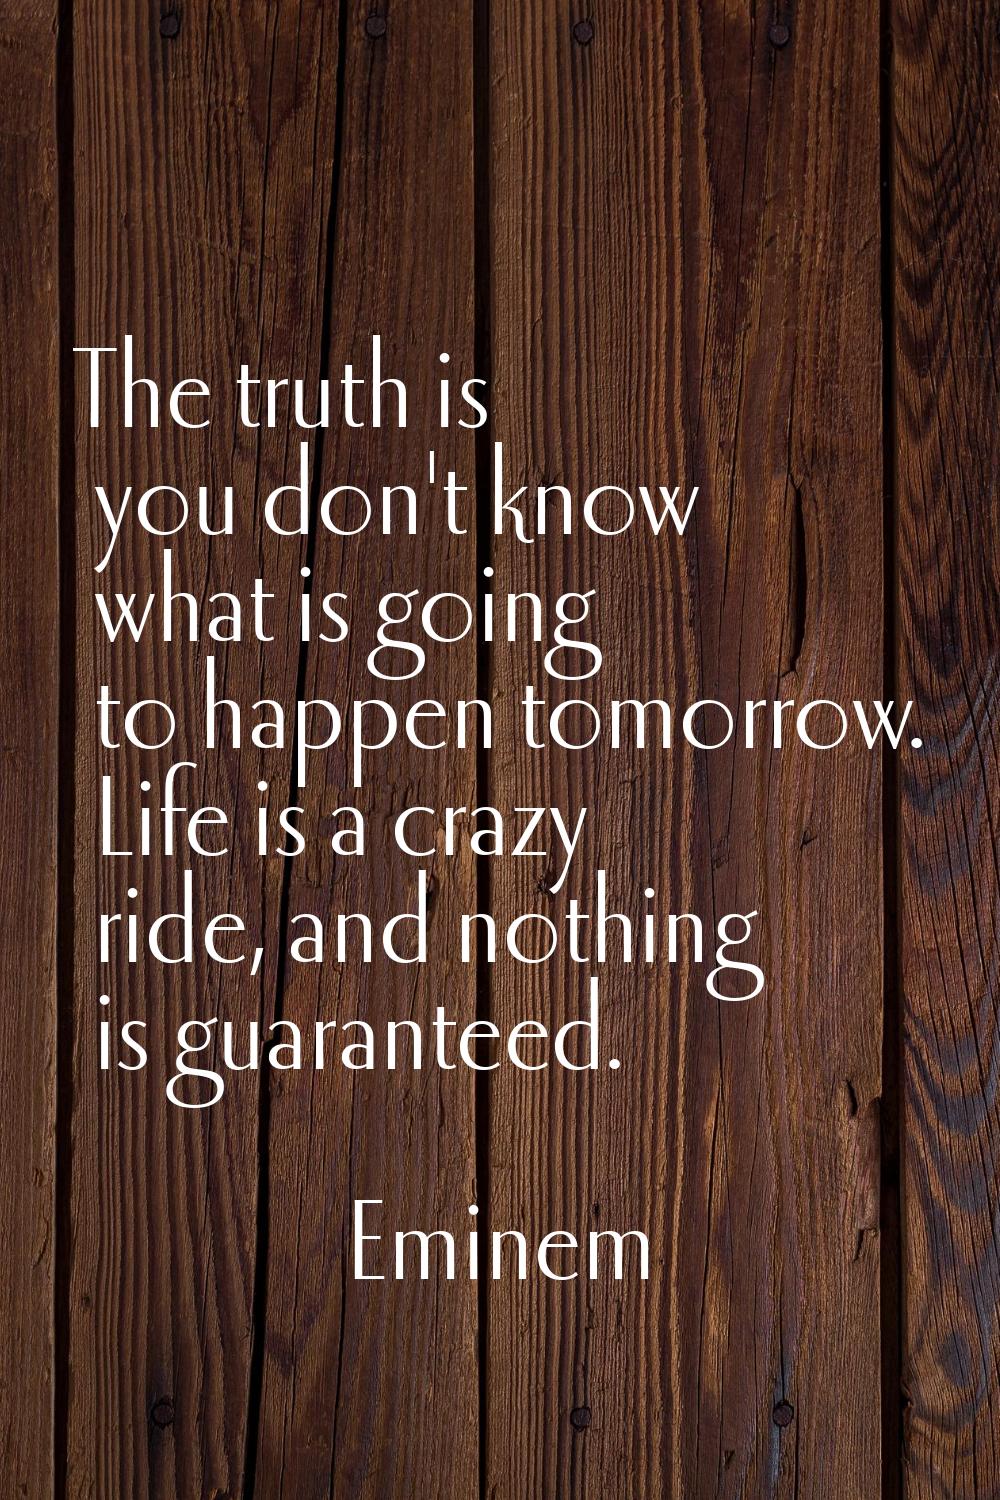 The truth is you don't know what is going to happen tomorrow. Life is a crazy ride, and nothing is 